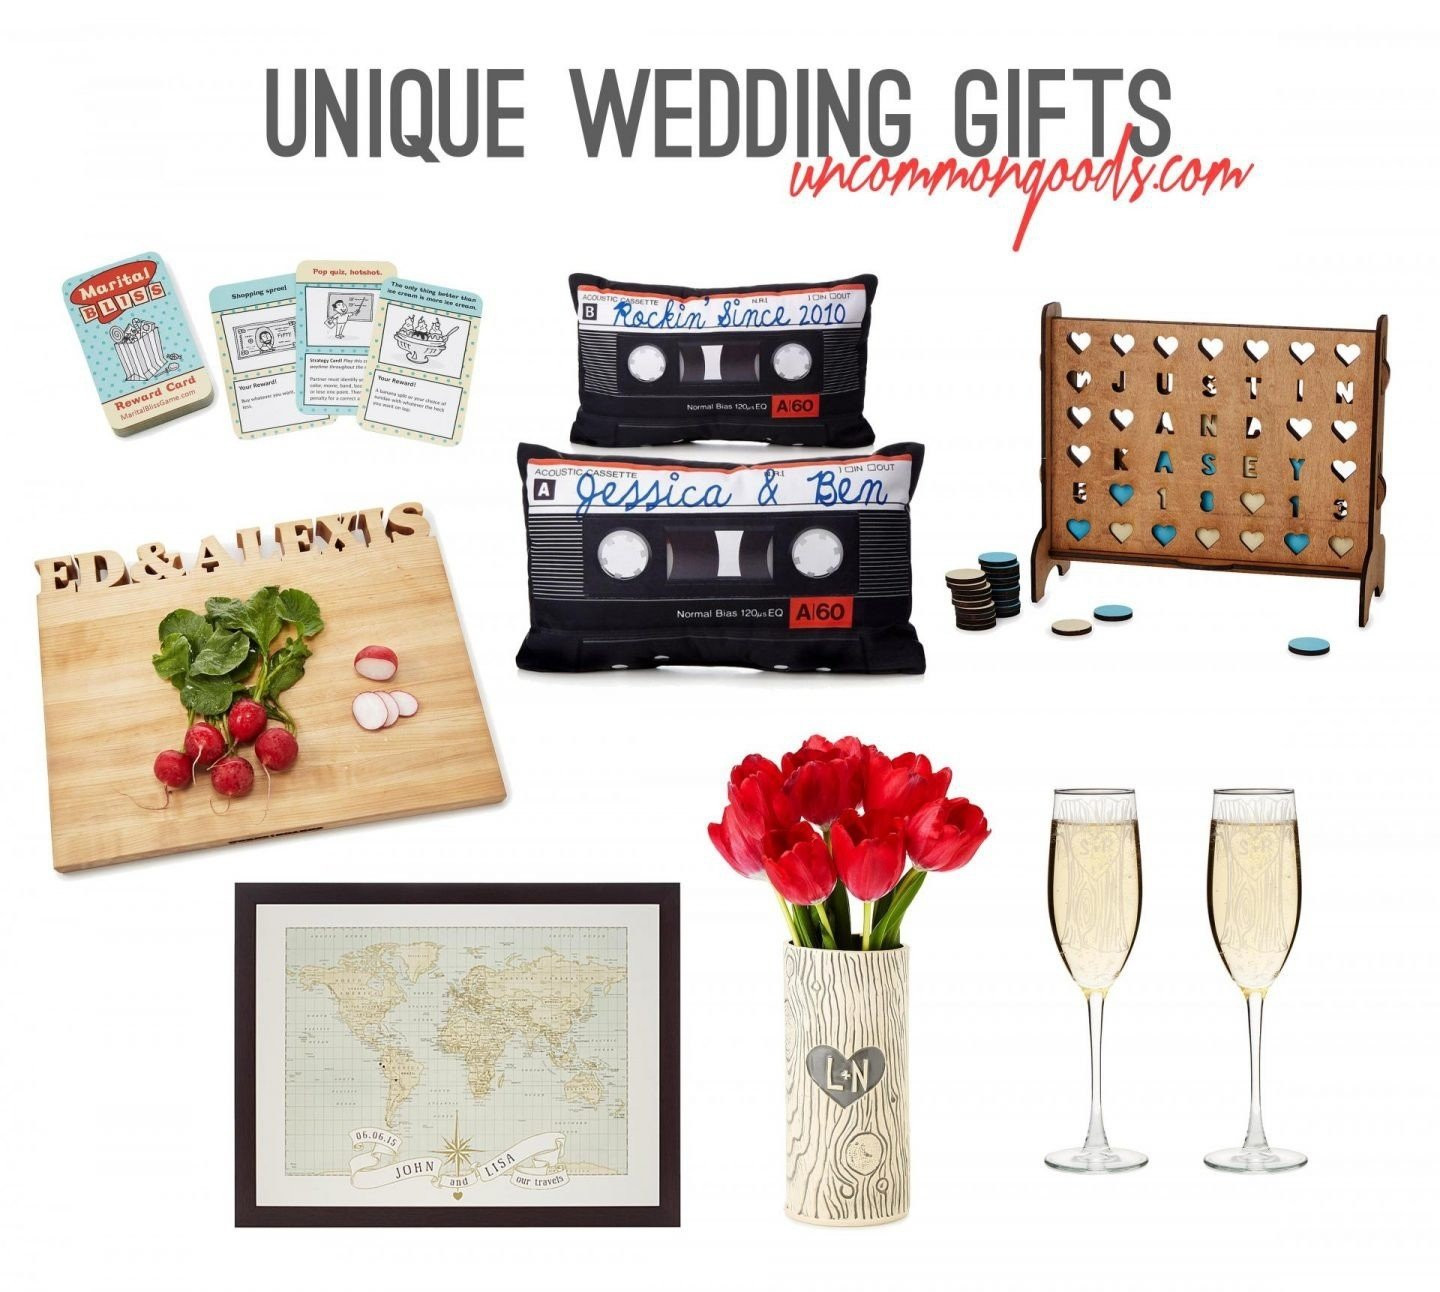 Wedding Gift Ideas For Older Couples Second Marriage
 10 Fashionable Wedding Gift Ideas For Second Marriages 2019